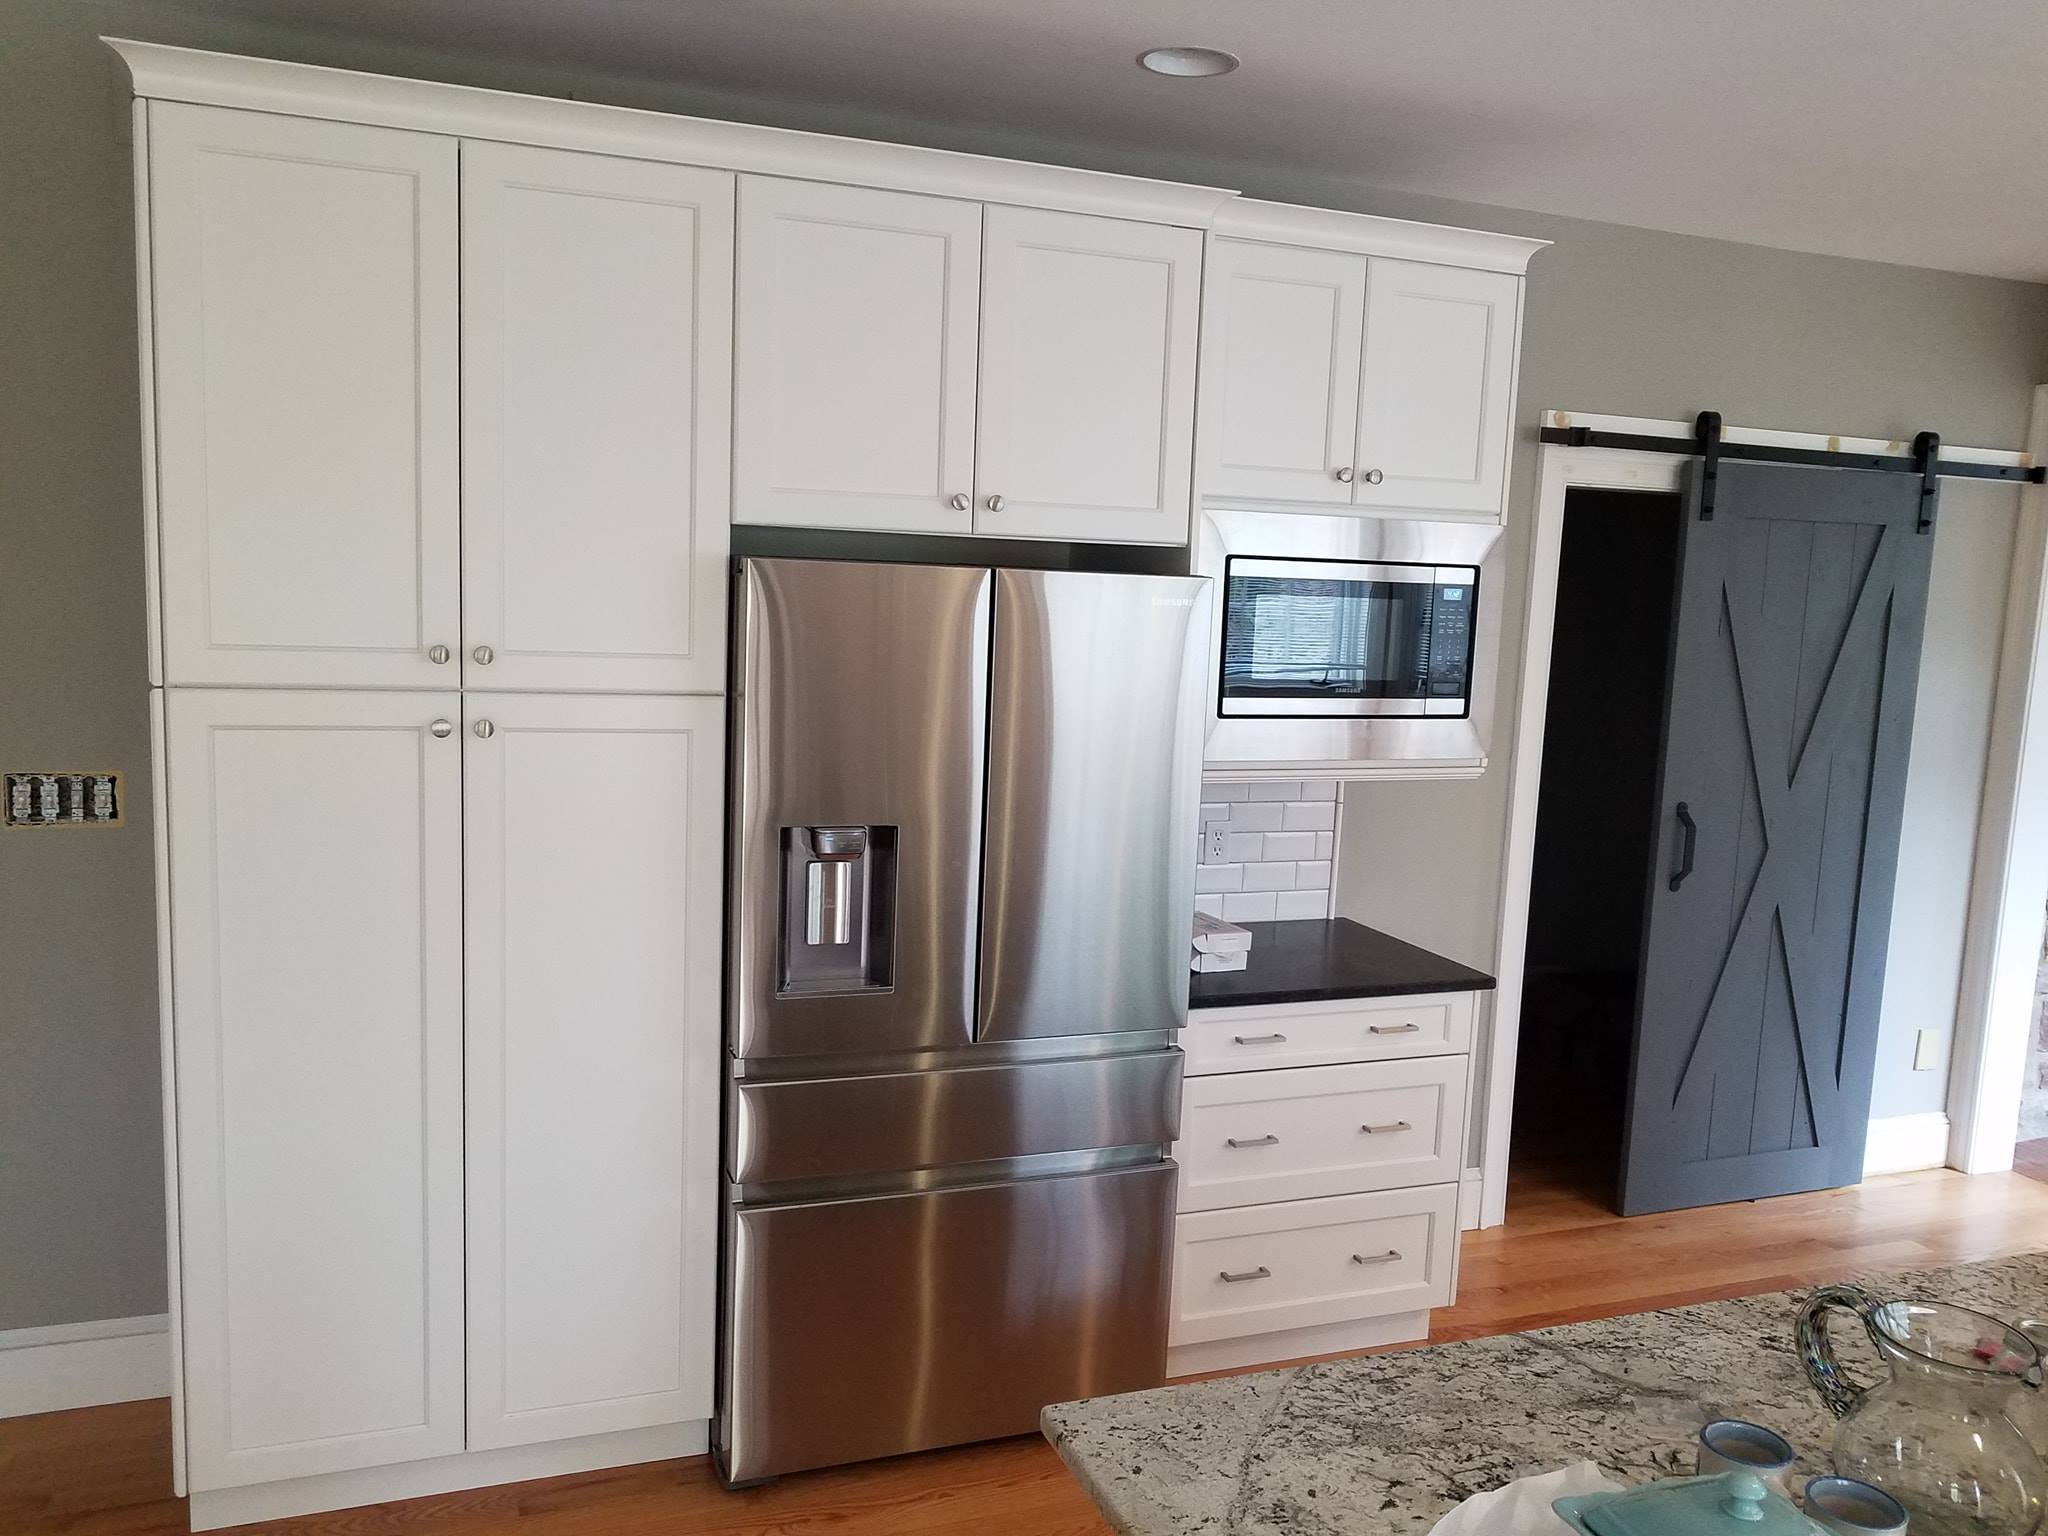 Newly remodeled kitchen with cabinets around fridge